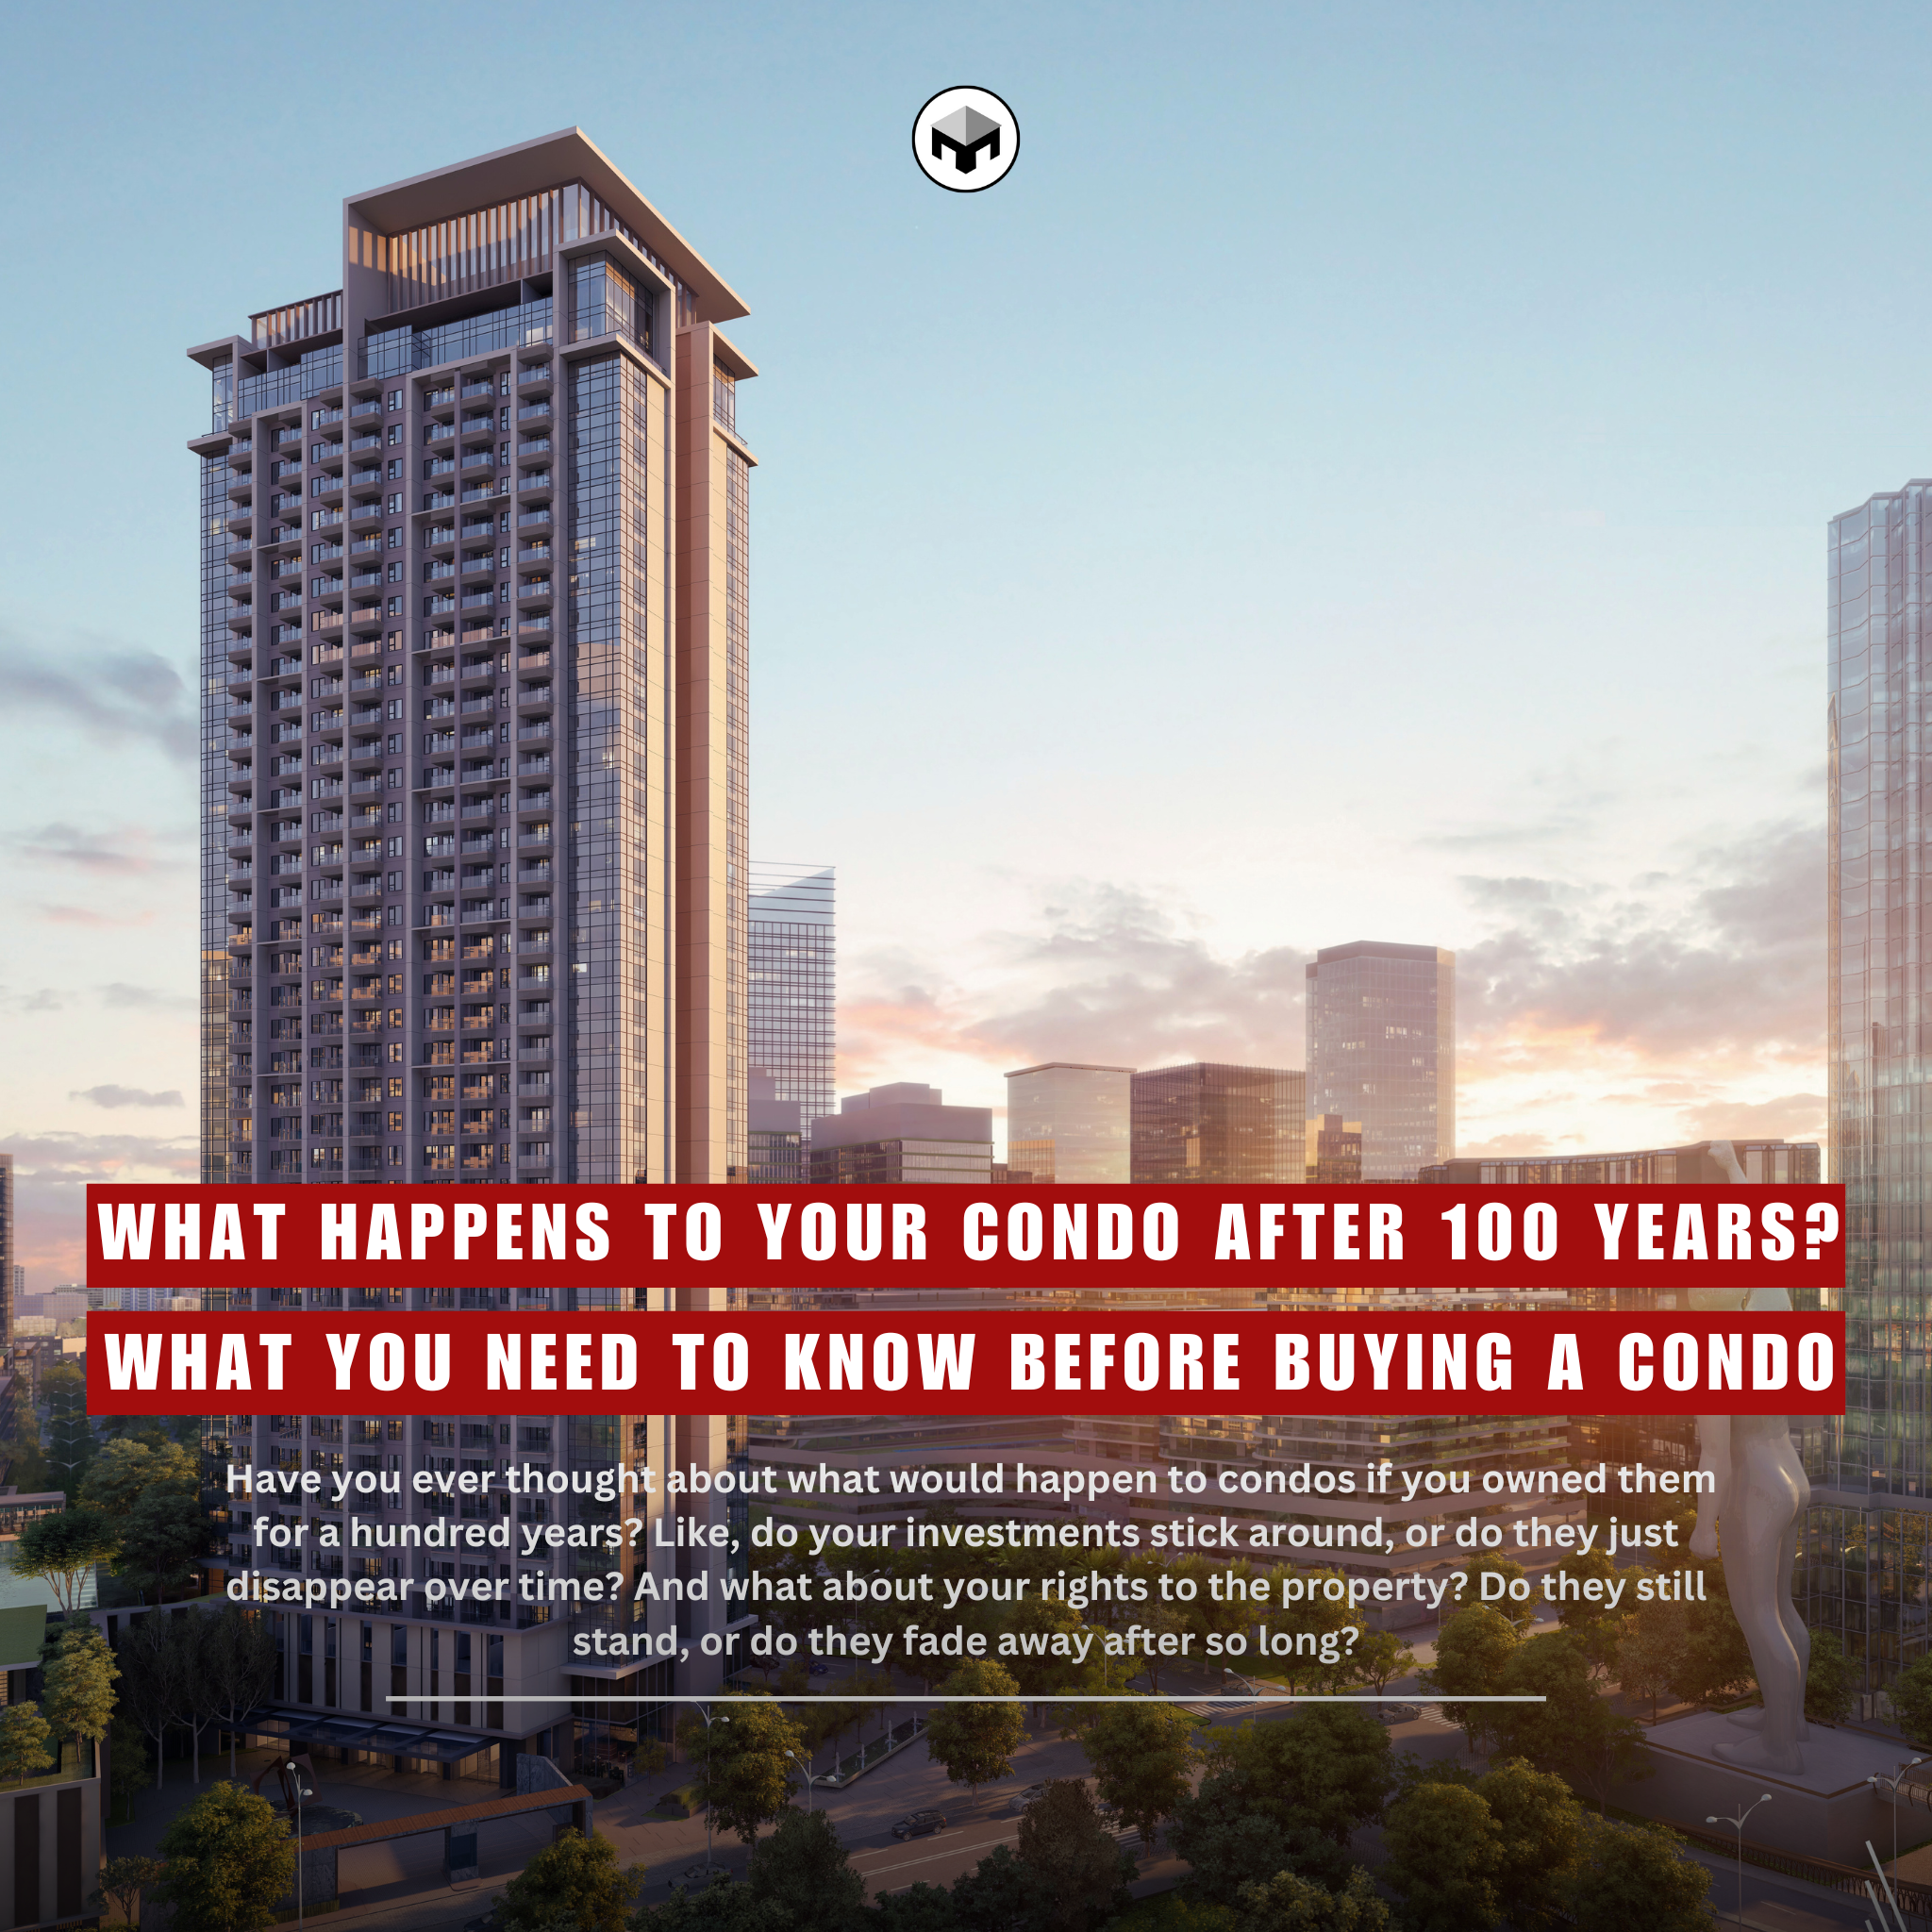 What happens to your condo after 100 years?